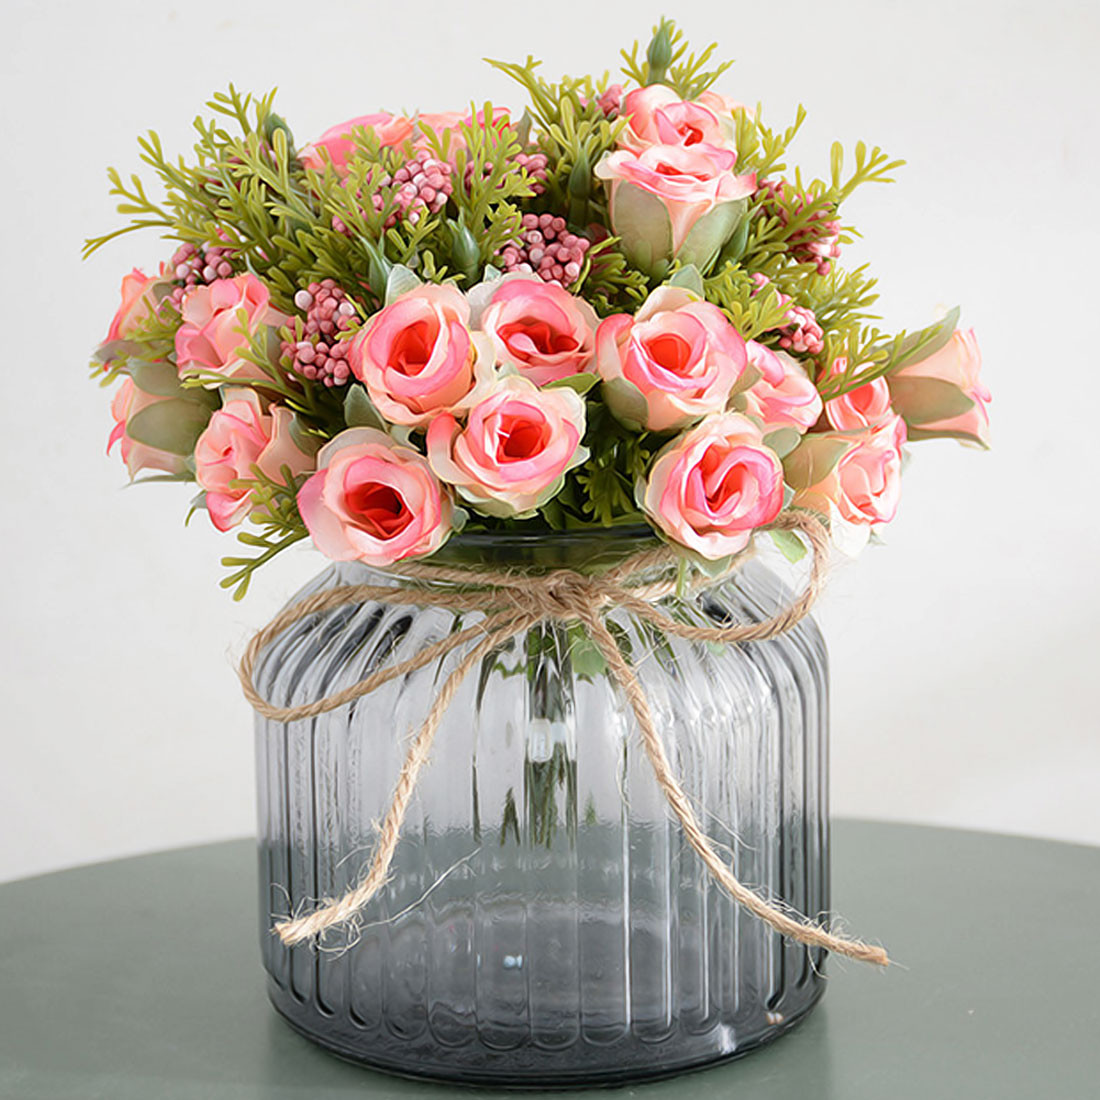 12 Fabulous Head Vases for Sale 2024 free download head vases for sale of small bud silk roses simulation flowers artificial flowers 13 heads with regard to total width20cm 1cm0 4 inch